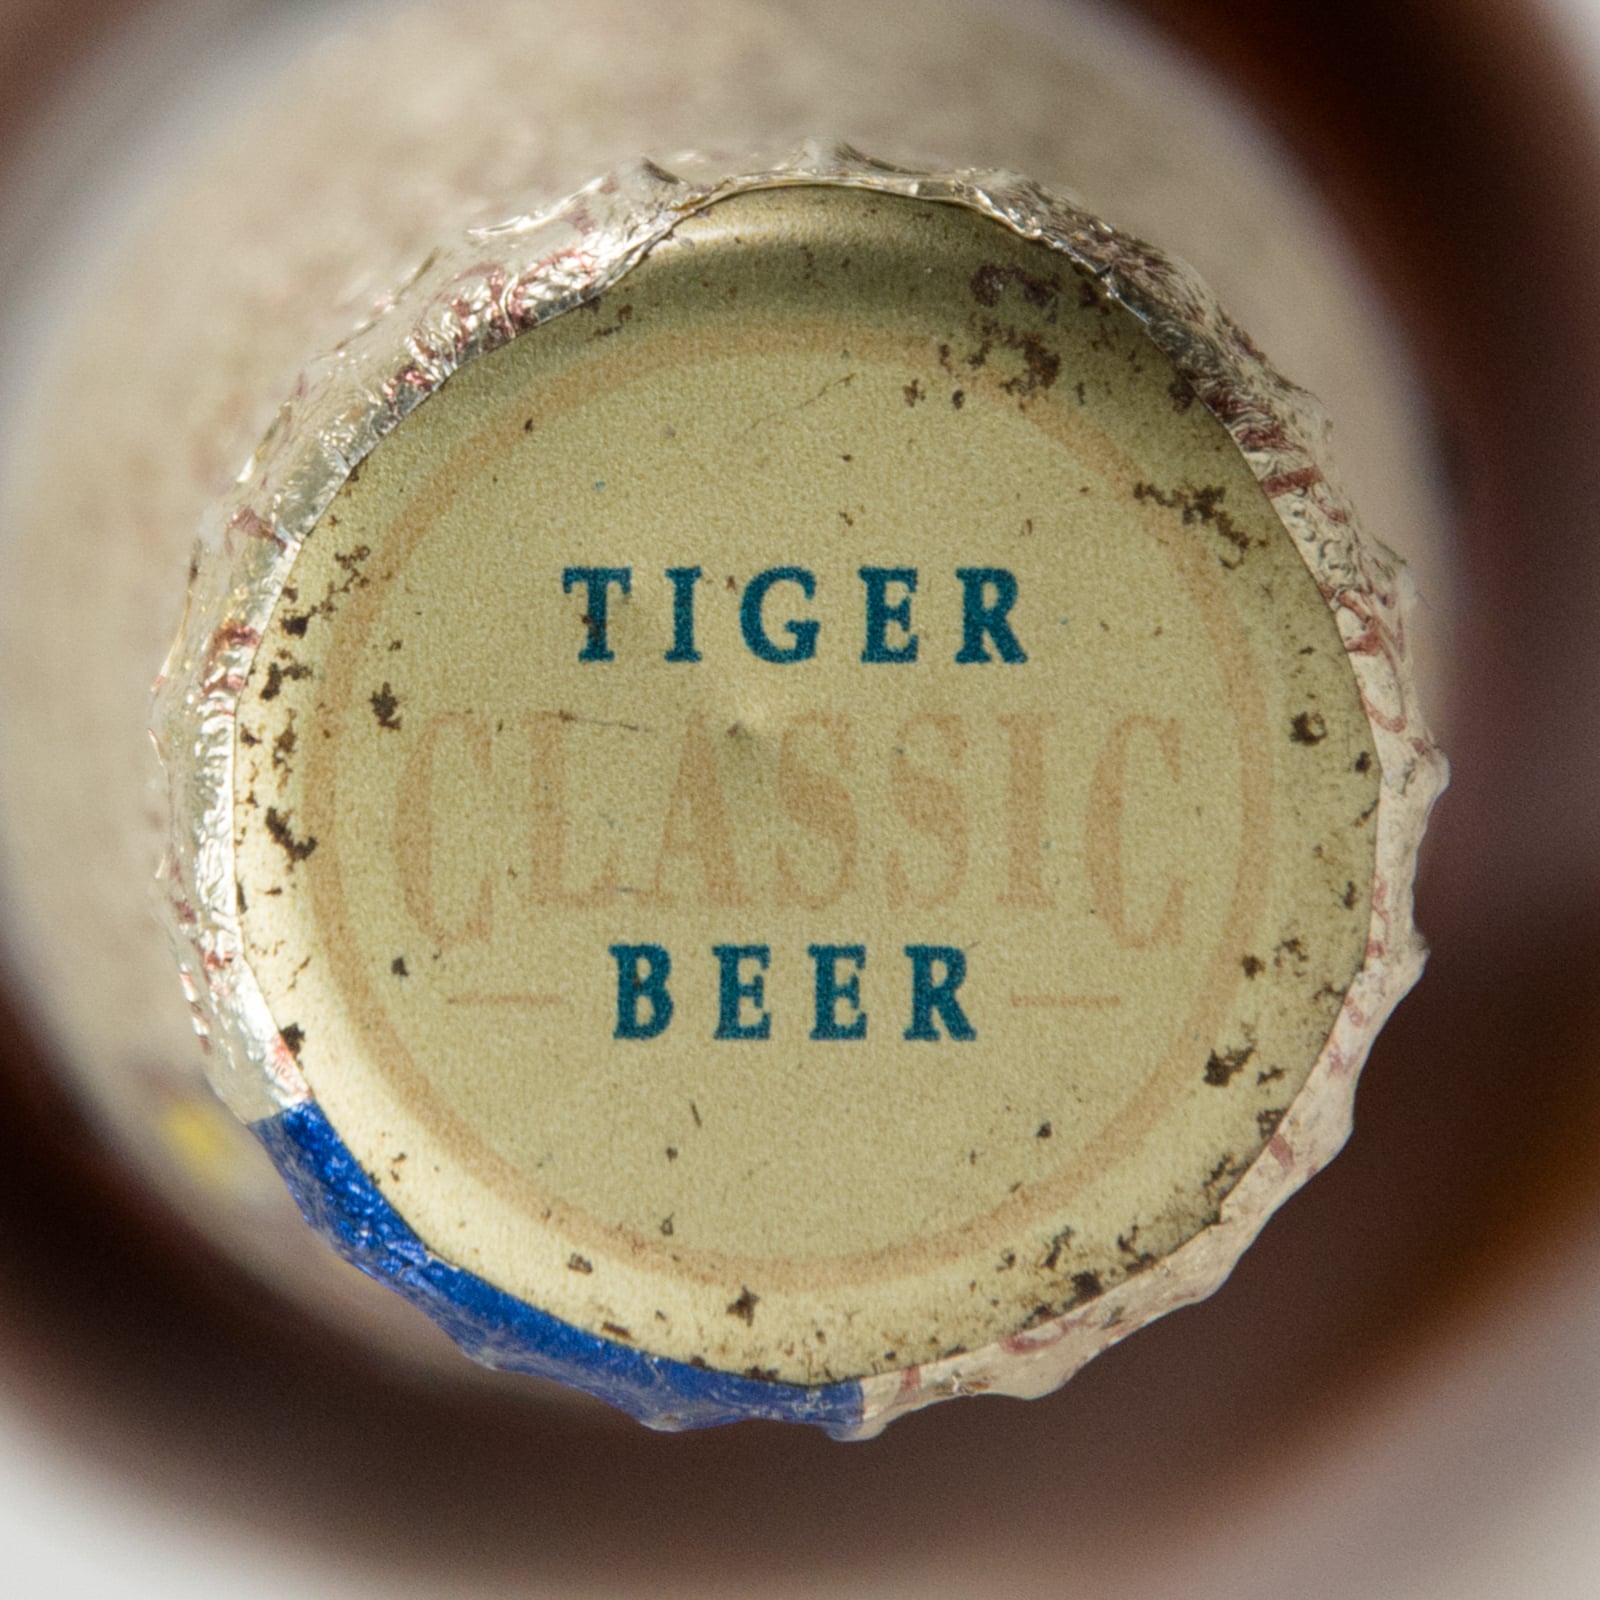 Tiger "Special Classic Edition" Bottle, 330 ml